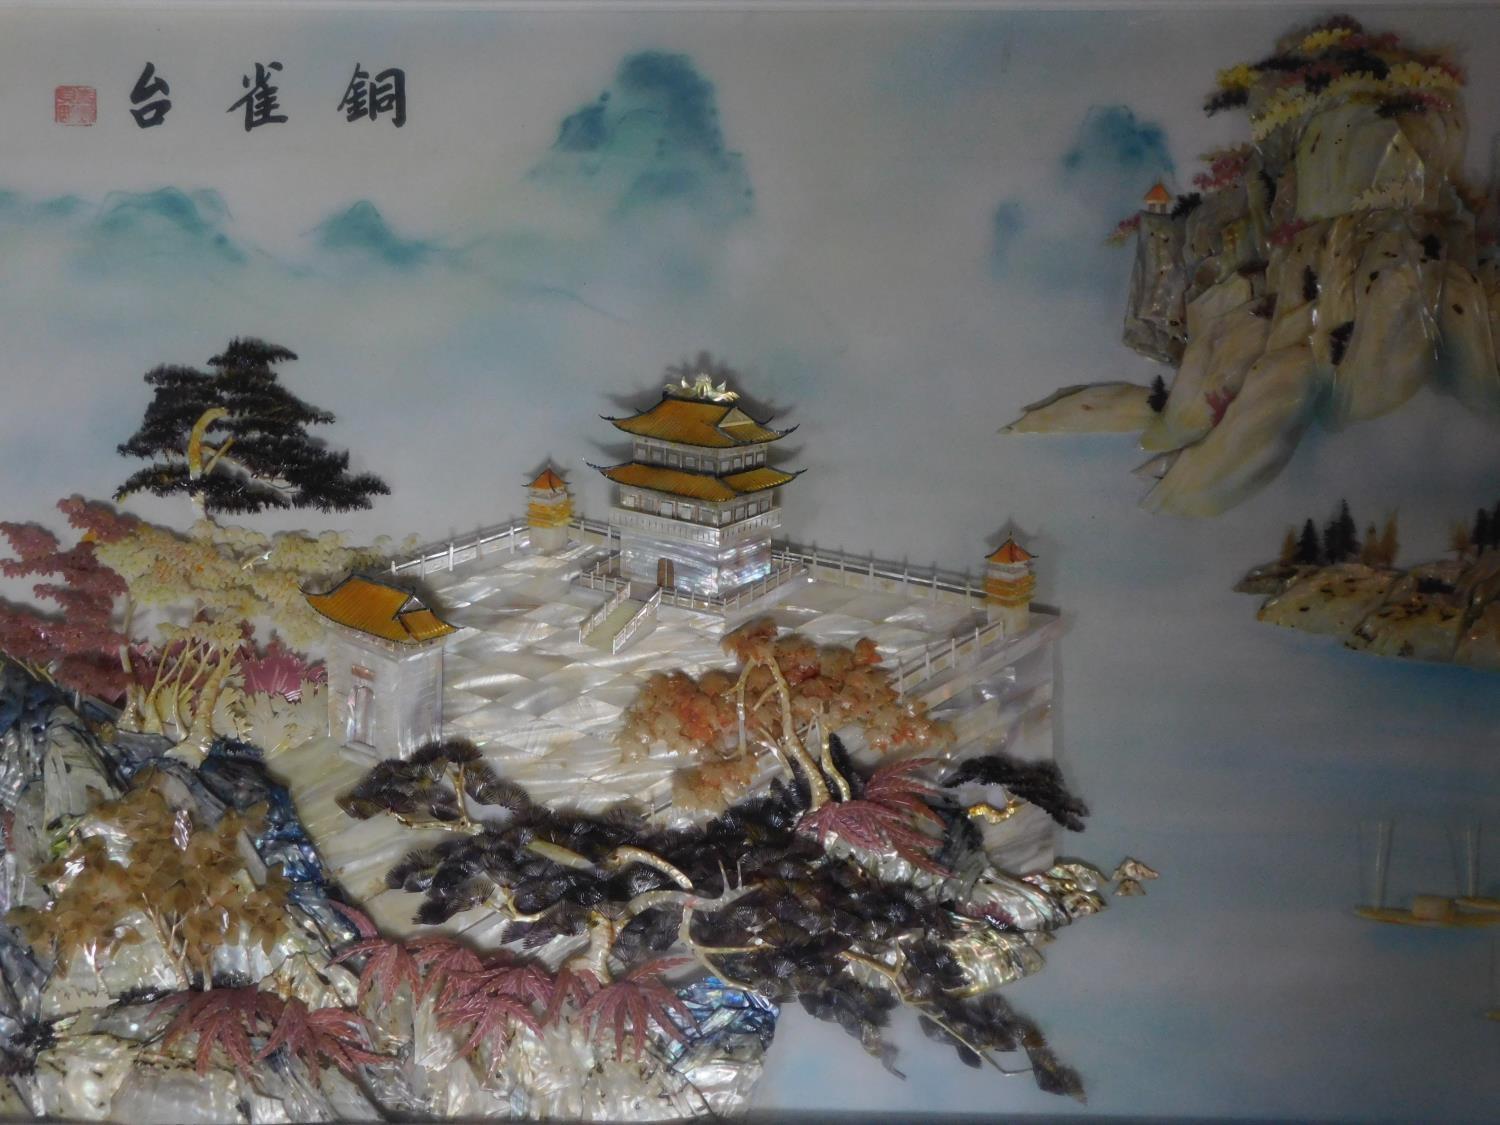 A large framed and glazed Chinese abalone shell and mother of pearl relief artwork depicting a